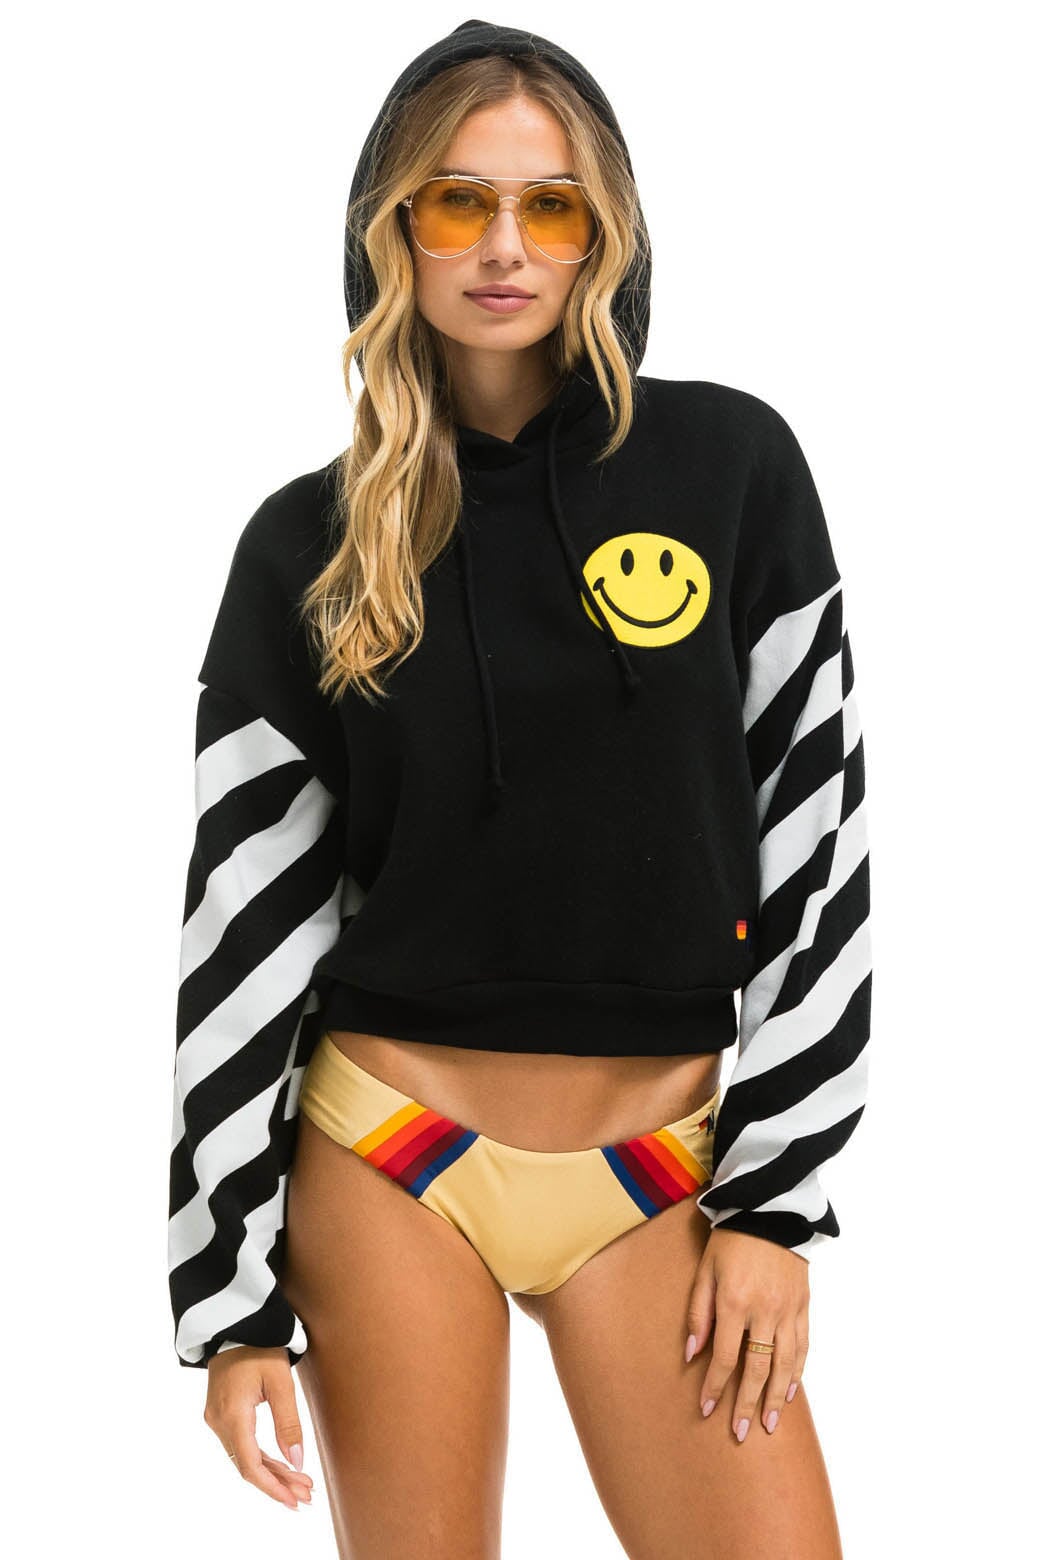 CAUTION STRIPE SLEEVE SMILEY 2 EMBROIDERY RELAXED CROPPED PULLOVER HOODIE - BLACK // WHITE Hoodie Aviator Nation 